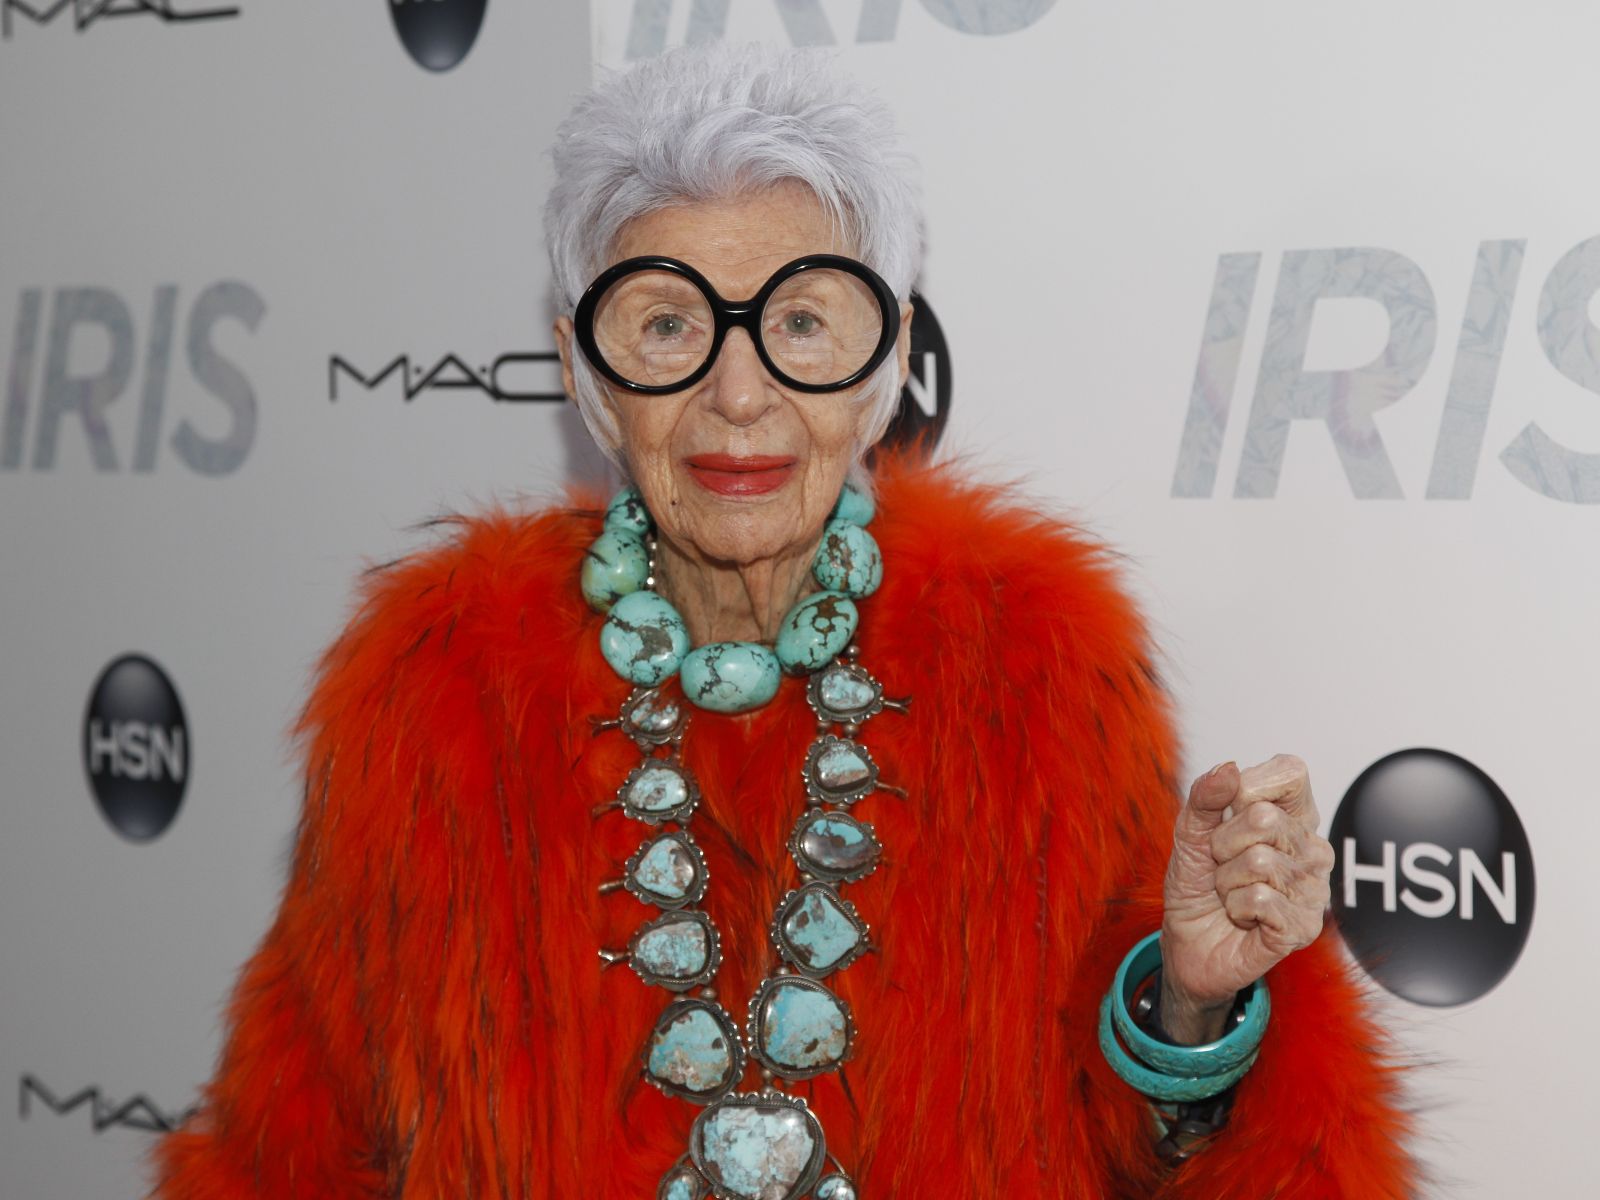 Iris Apfel attends the premiere of "Iris" at the Paris Theatre on Wednesday, April 22, 2015, in New York. (Photo by Andy Kropa/Invision/AP)